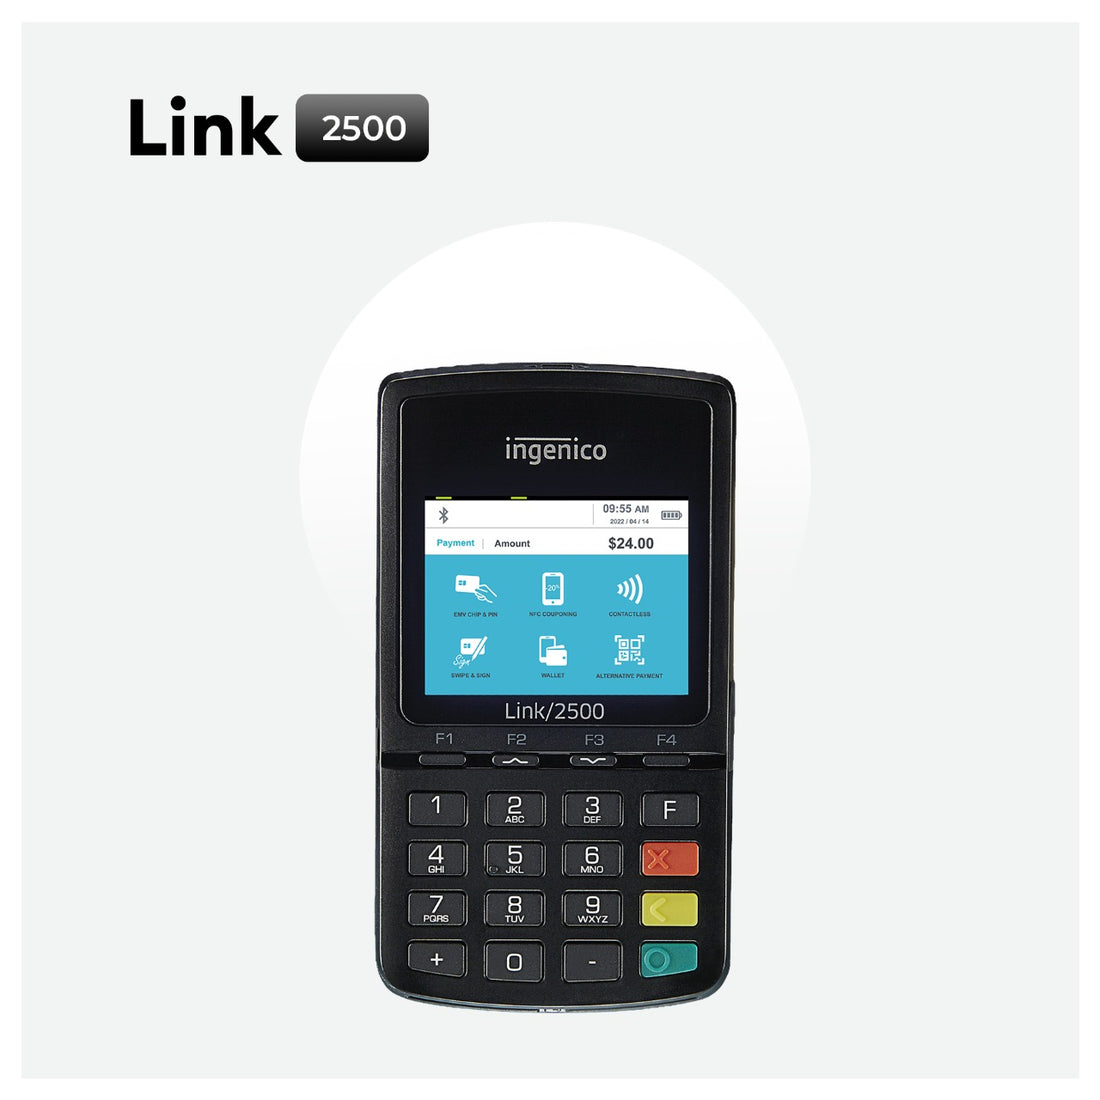 Ingenico Link 2500 terminal showing Apple Pay and Samsung Pay options, compatible with EkiKart&